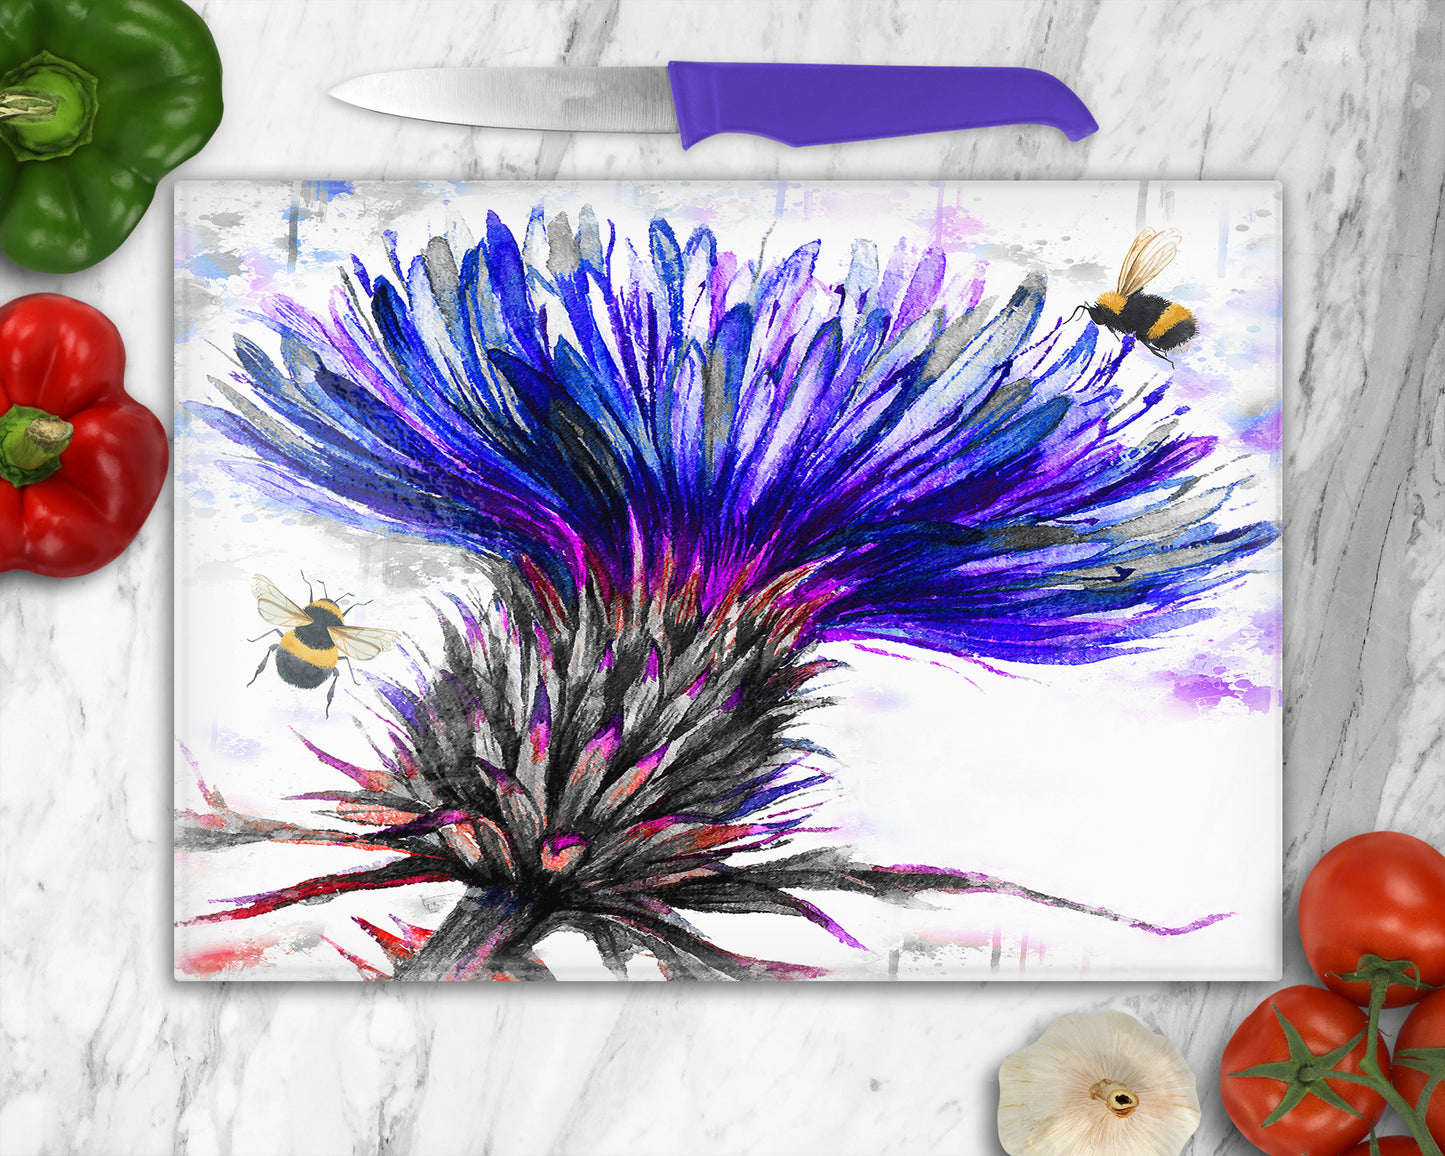 Big Thistle and Bees Glass Chopping Board, Worktop Saver